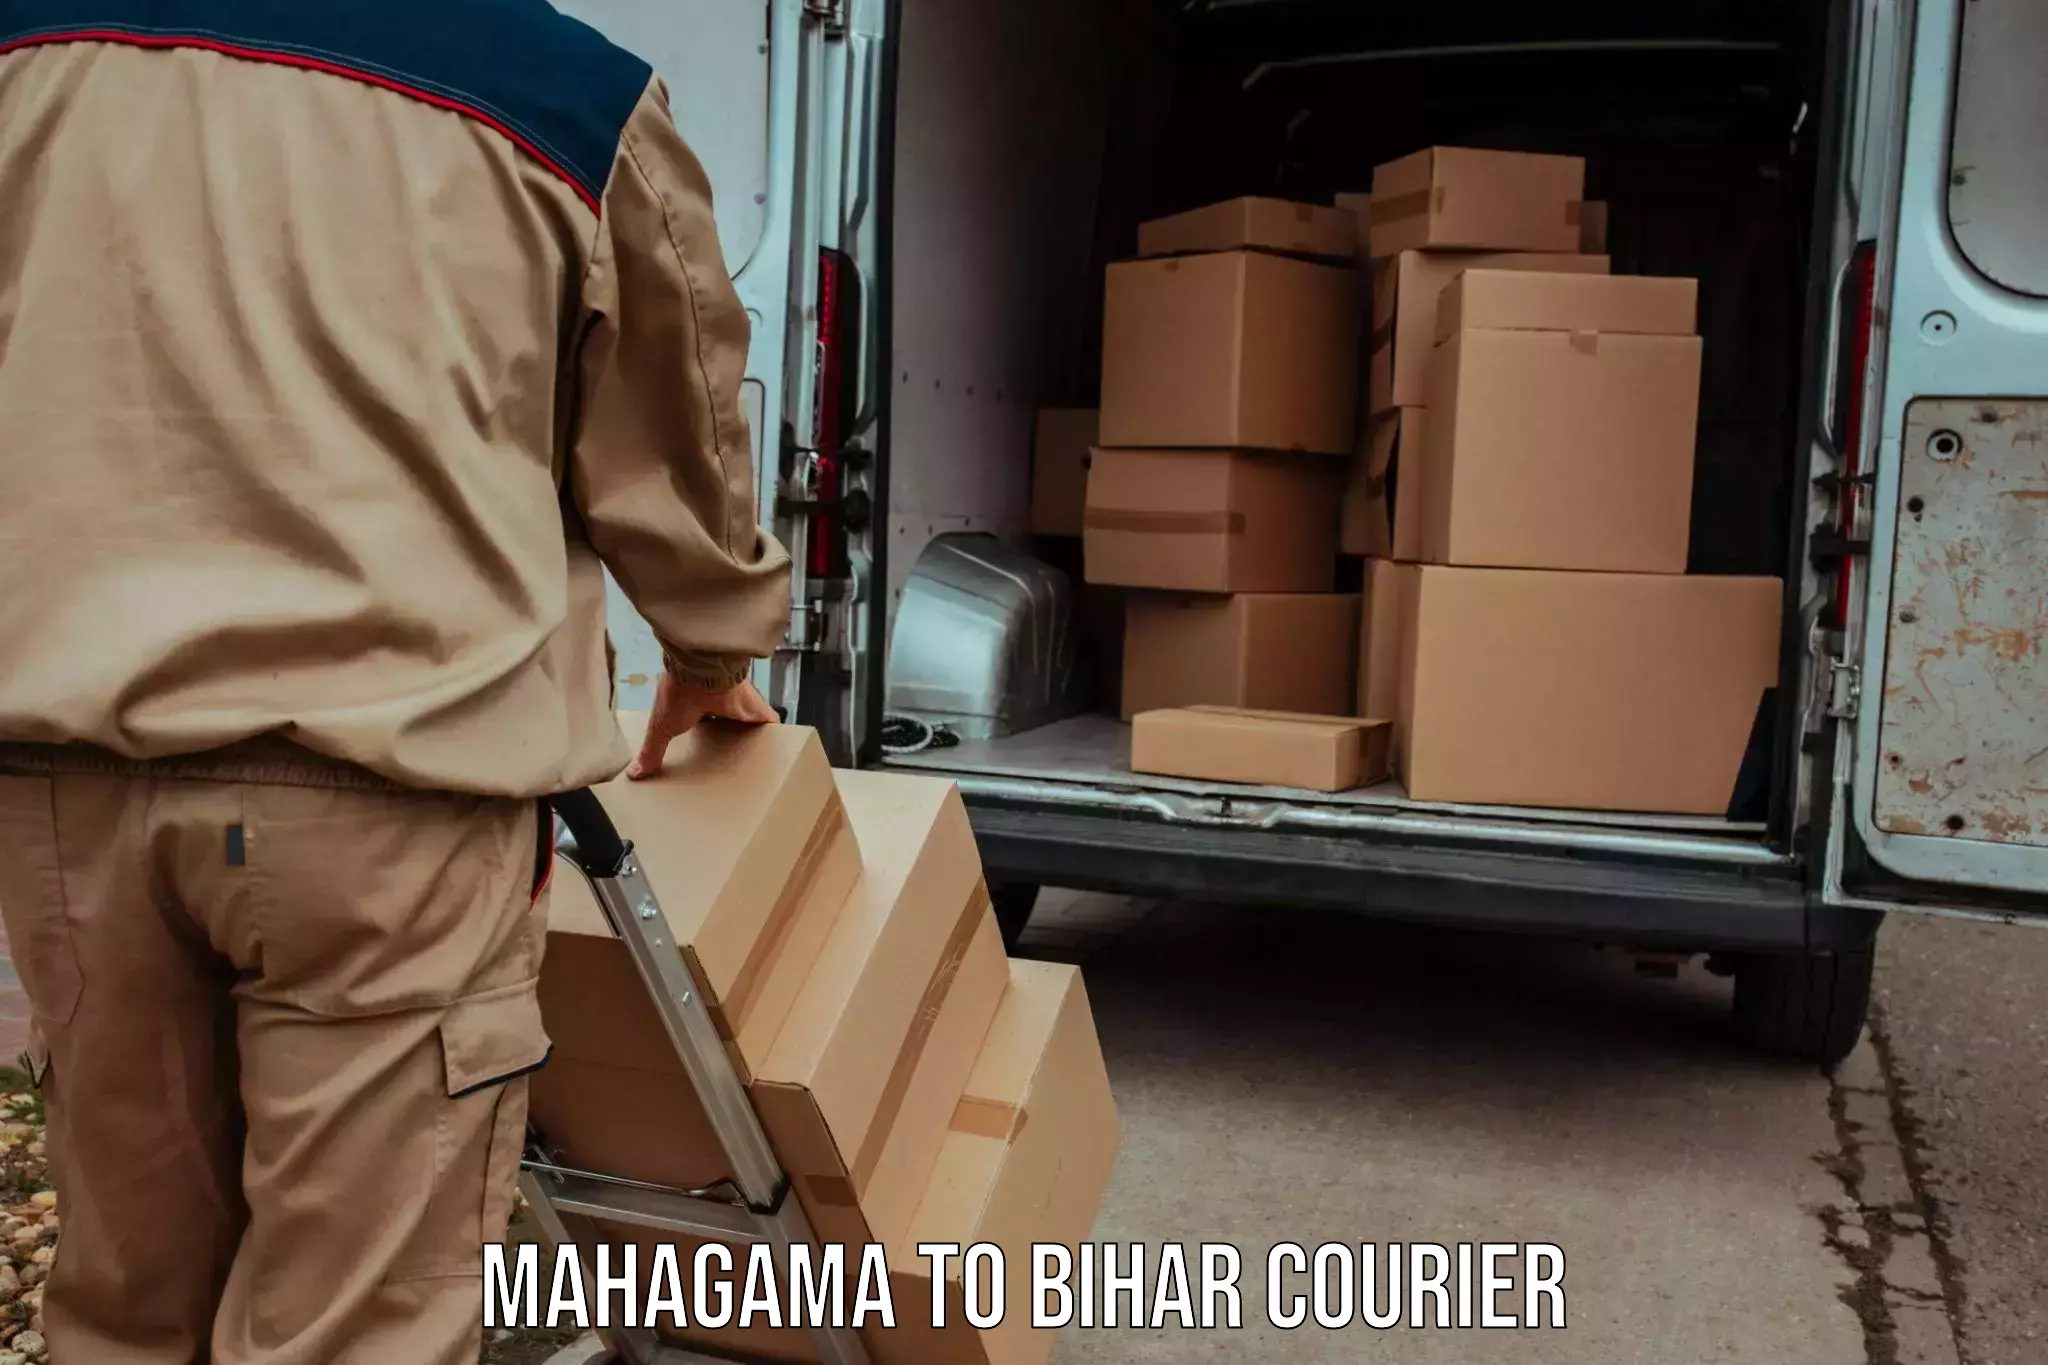 Next-day delivery options Mahagama to Bihar